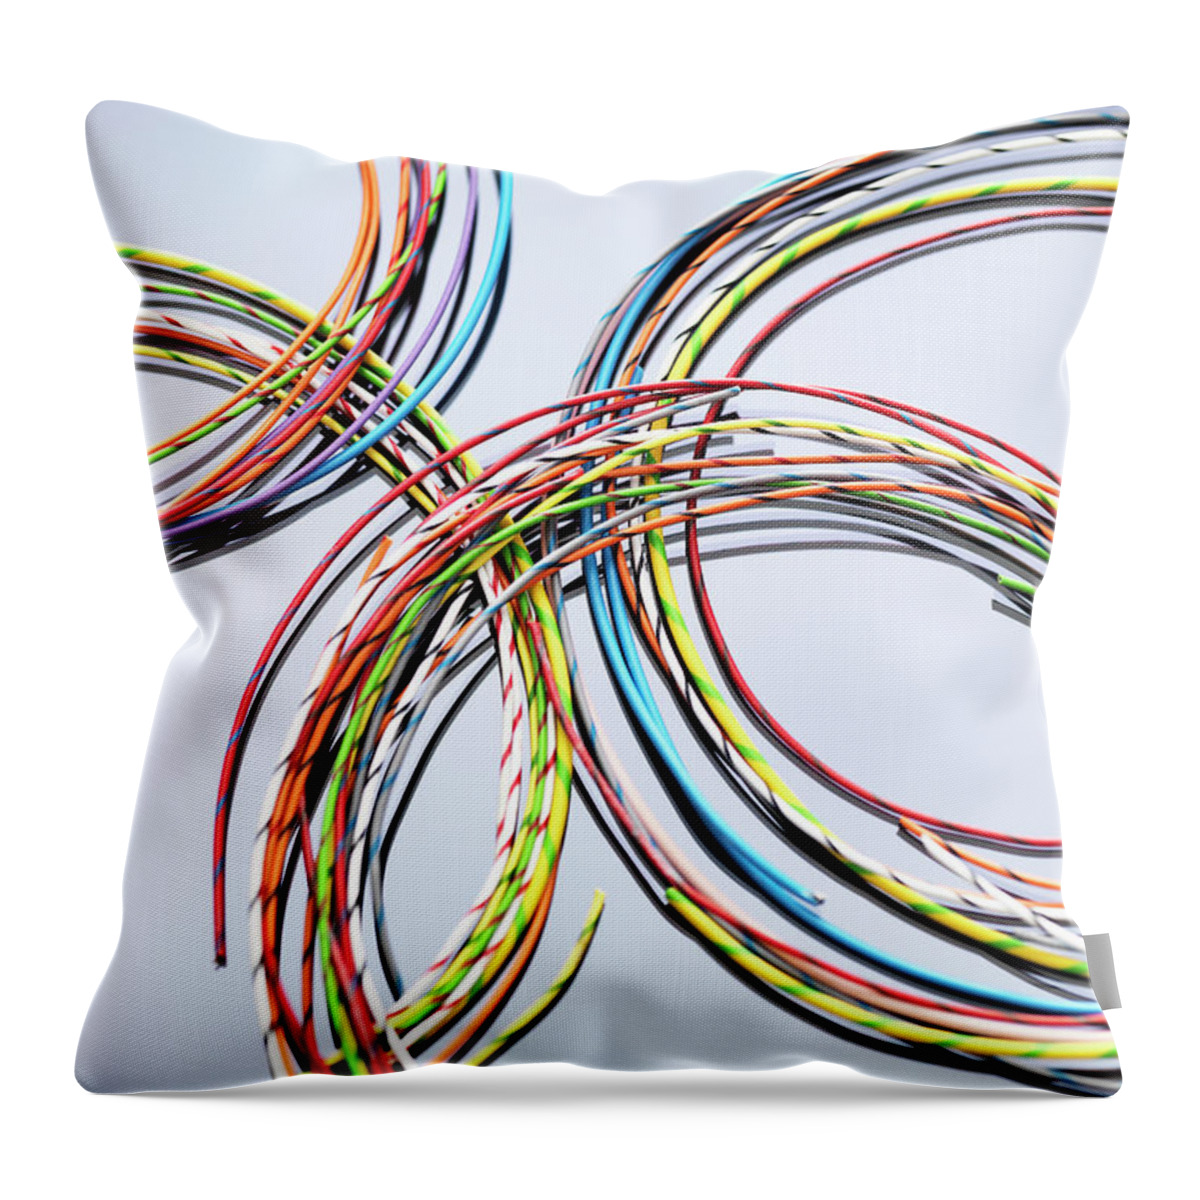 Wired Throw Pillow featuring the photograph Colorful Cables Used In Electrical And by Andrew Brookes